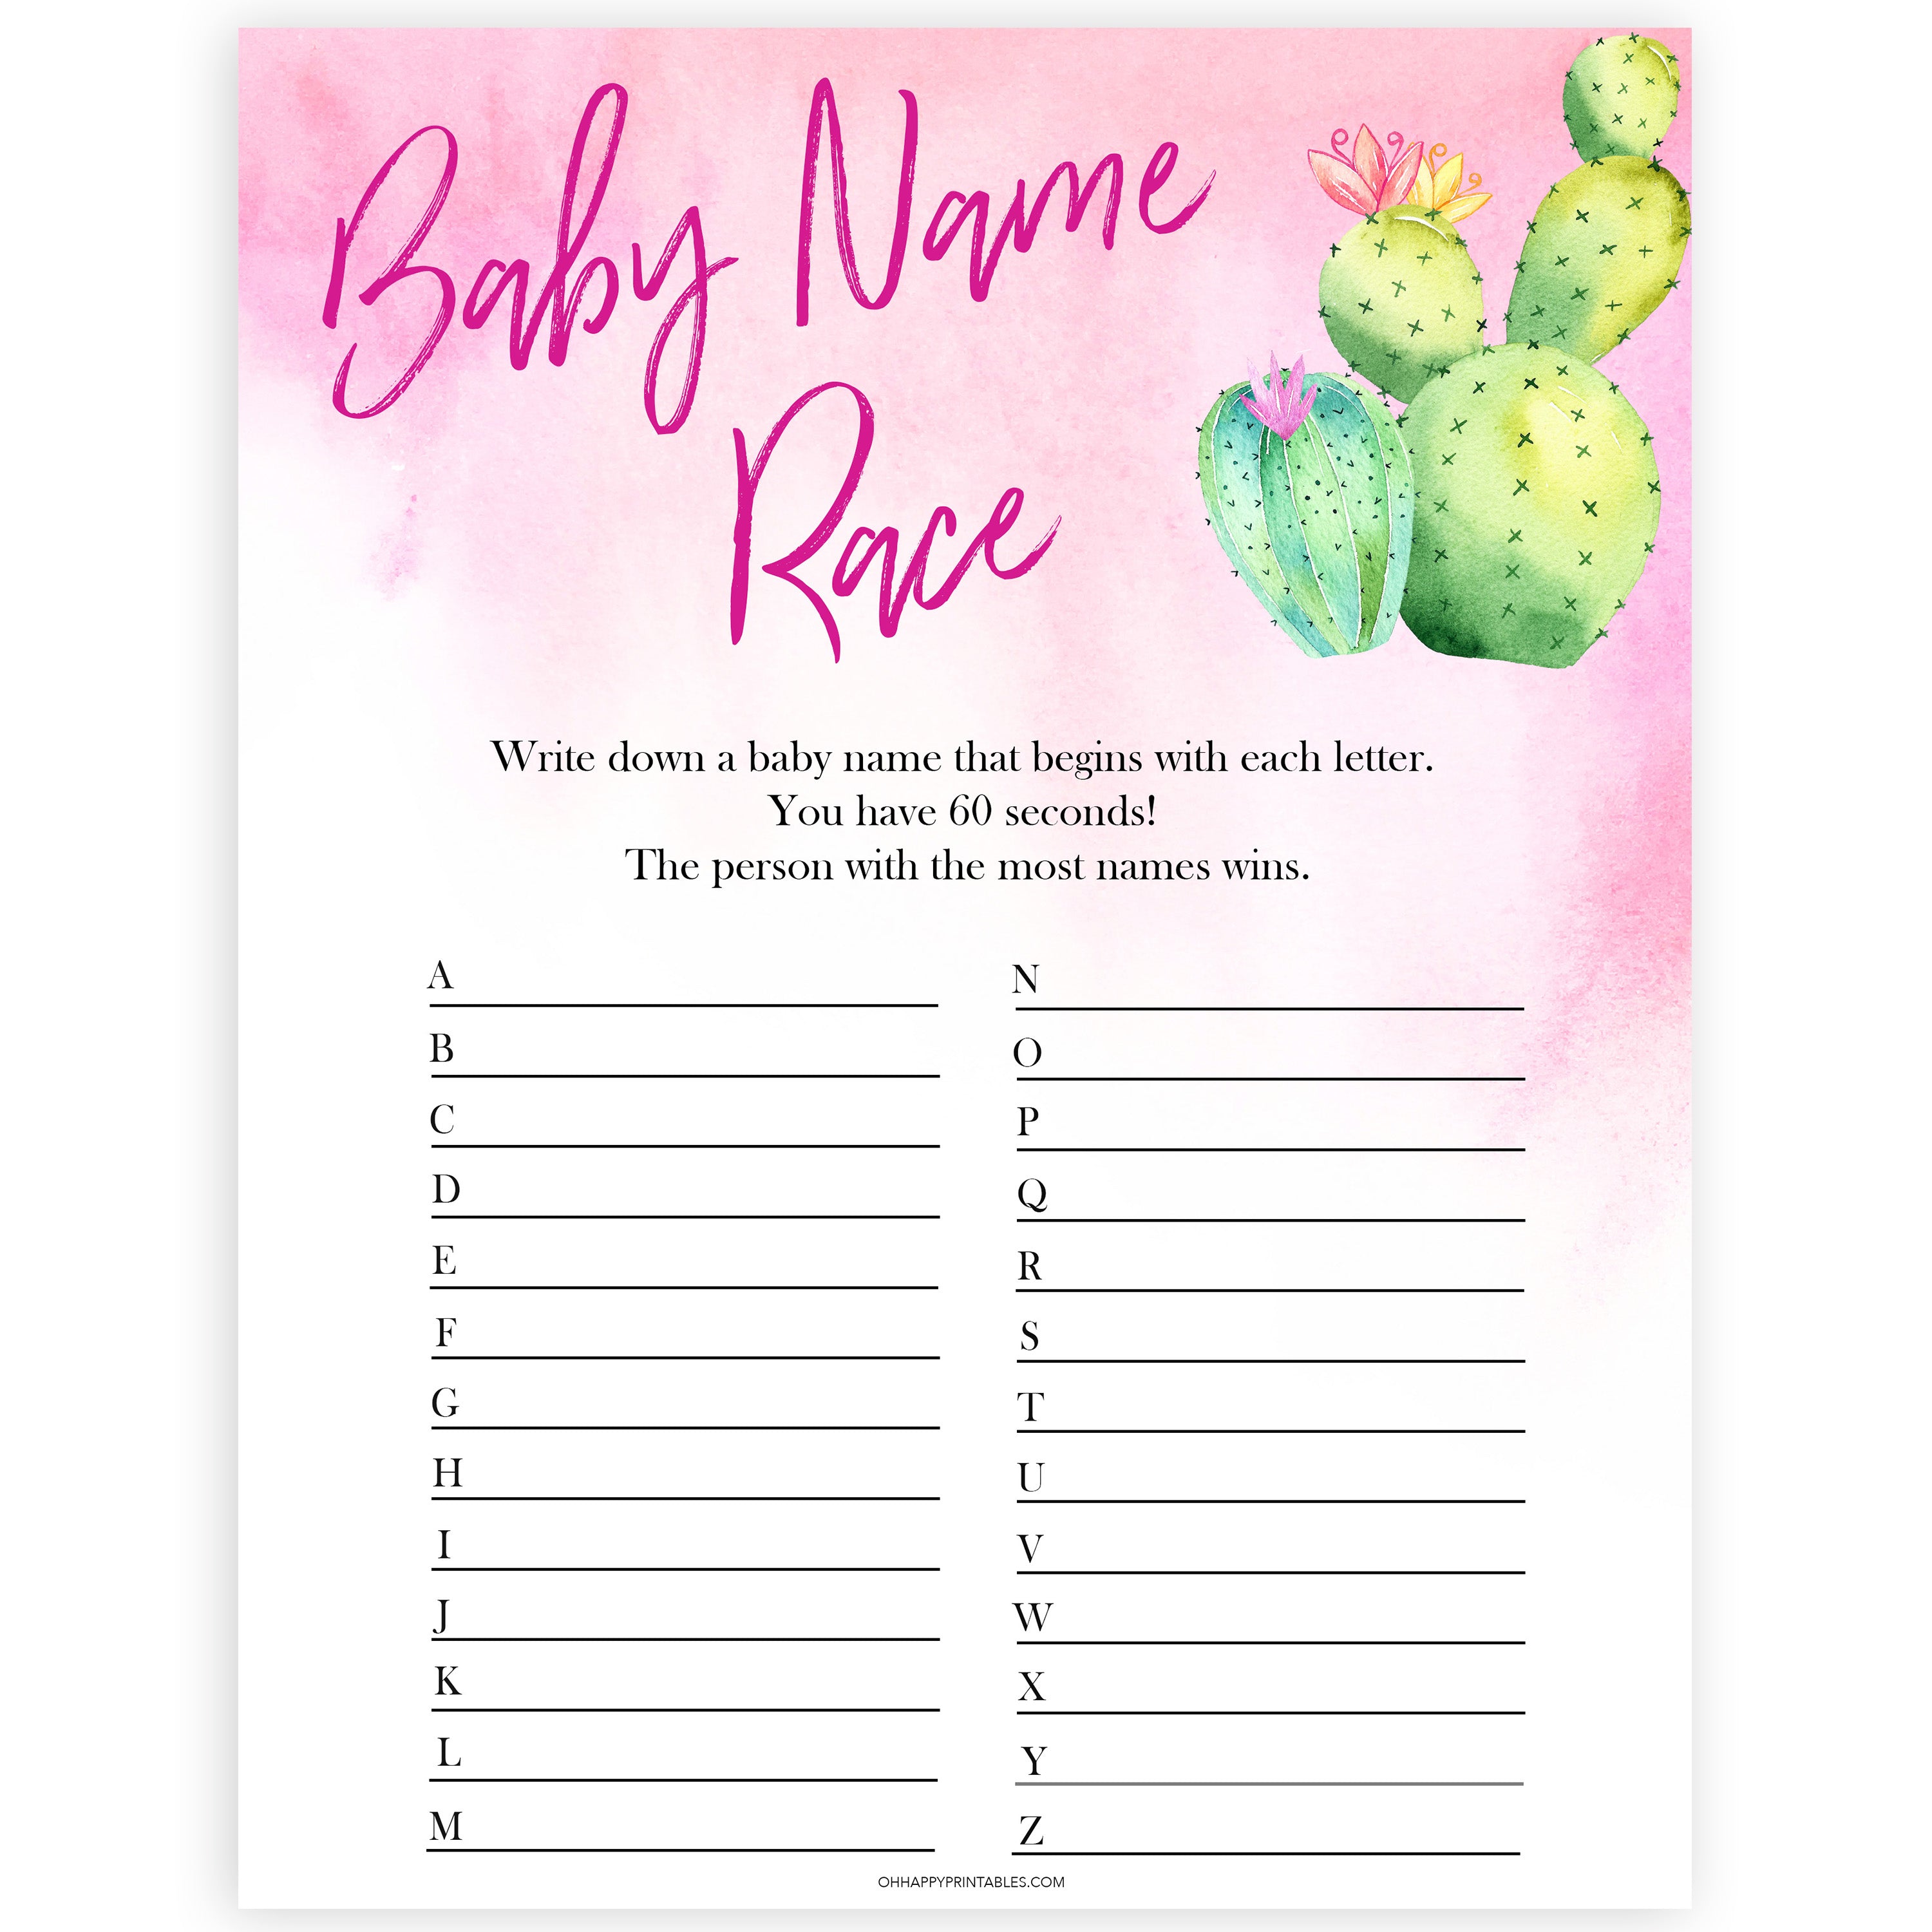 Cactus baby shower games, cactus baby name race baby game, printable baby games, Mexican baby shower, Mexican baby games, fiesta baby games, popular baby games, printable baby games